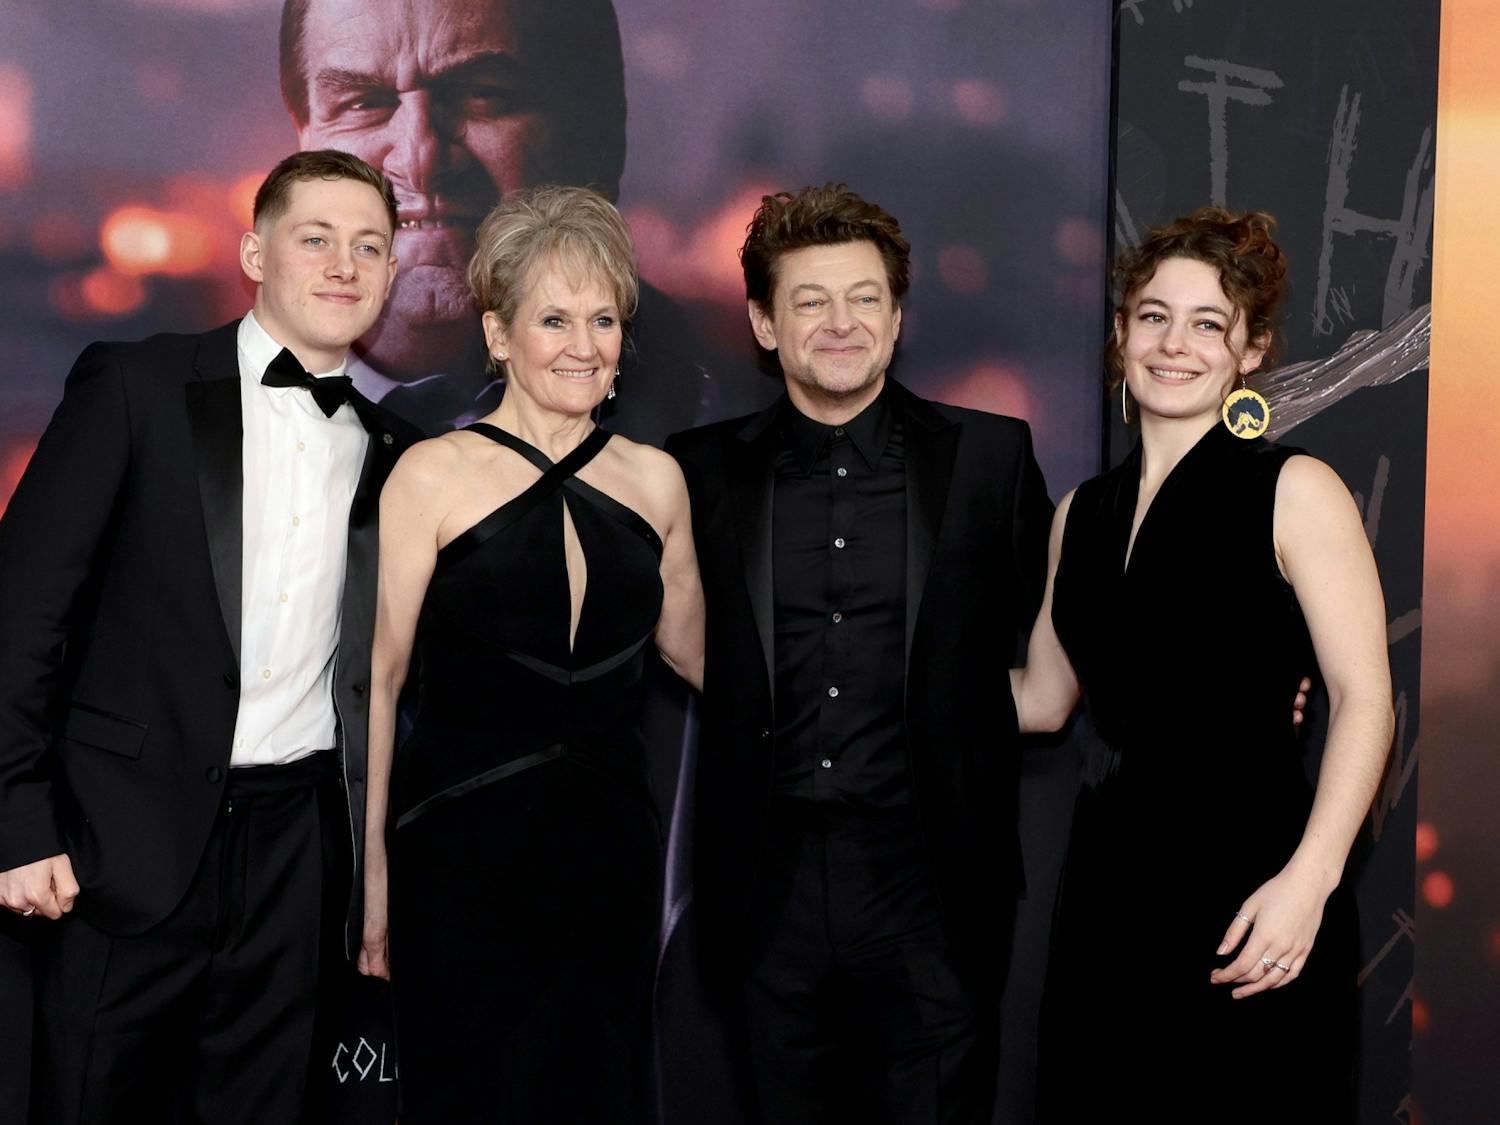 (L-R) Sonny Serkis, Lorraine Ashbourne,  Andy Serkis and Ruby Serkis attend the world premiere of "The Batman" at Josie Robertson Plaza on Tuesday, March 1, 2022, in New York. Photo courtesy of TNS.